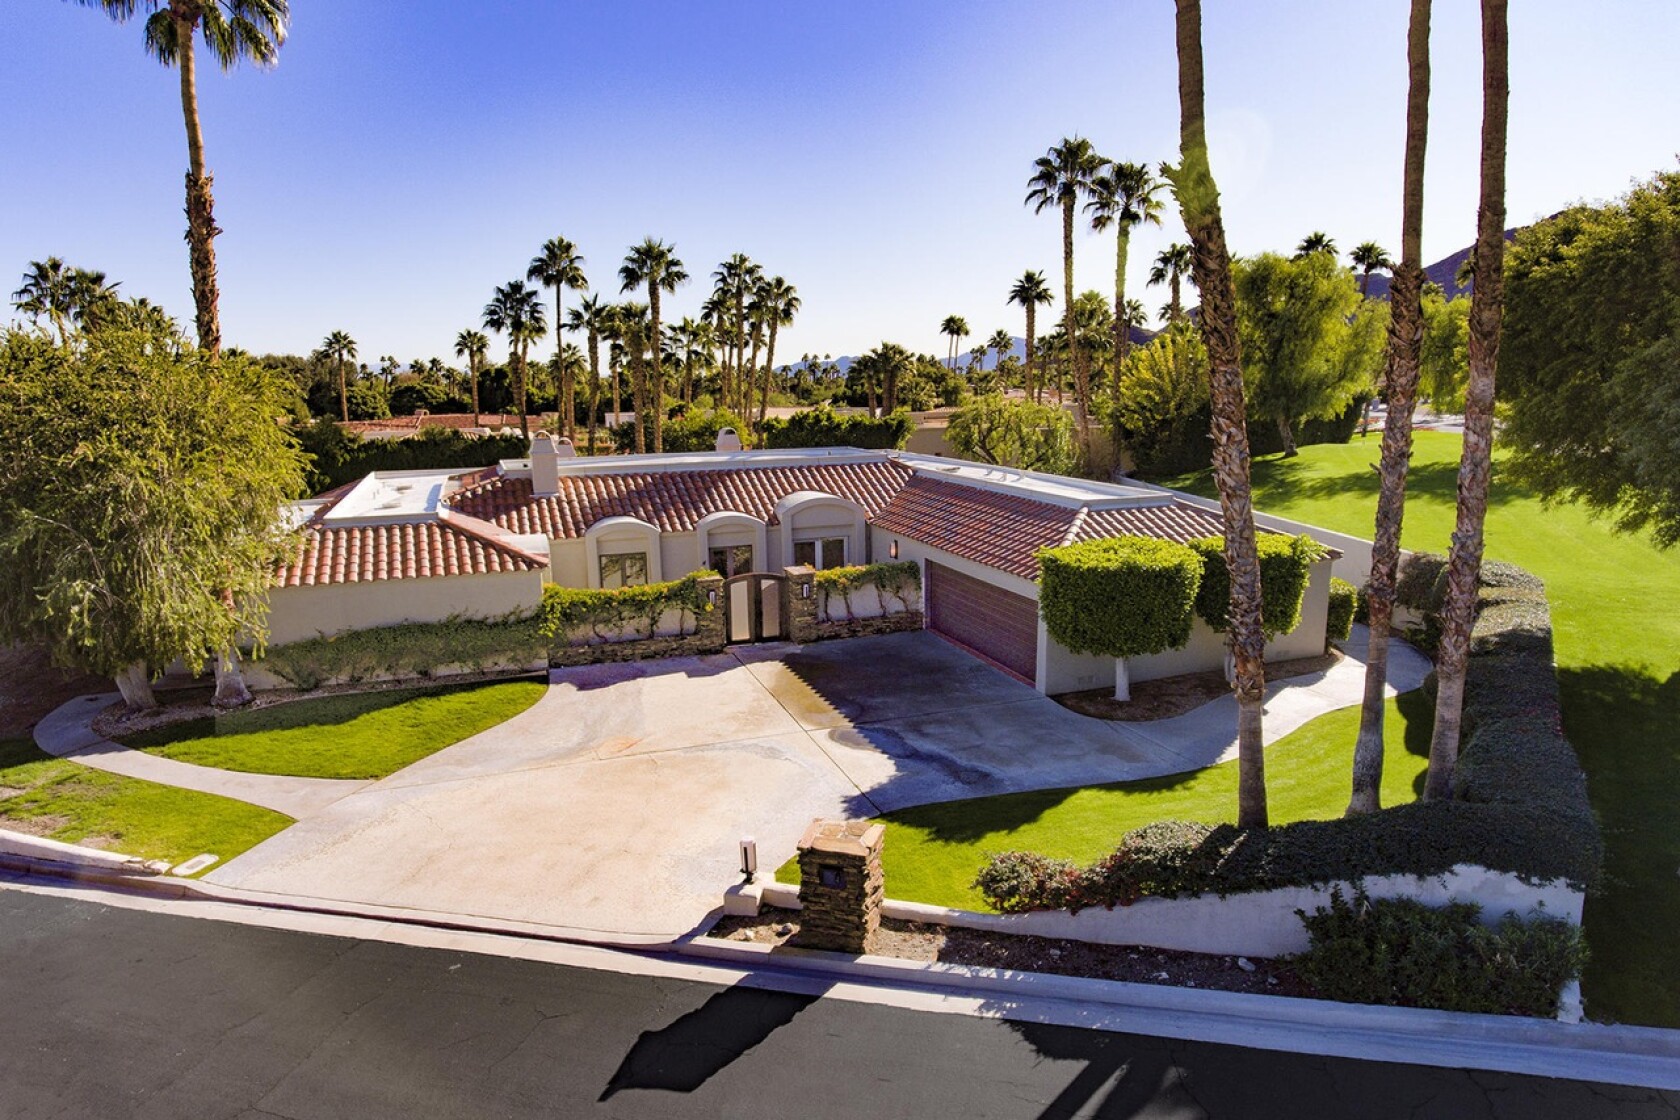 Carol Channing’s Rancho Mirage home sells - Los Angeles Times